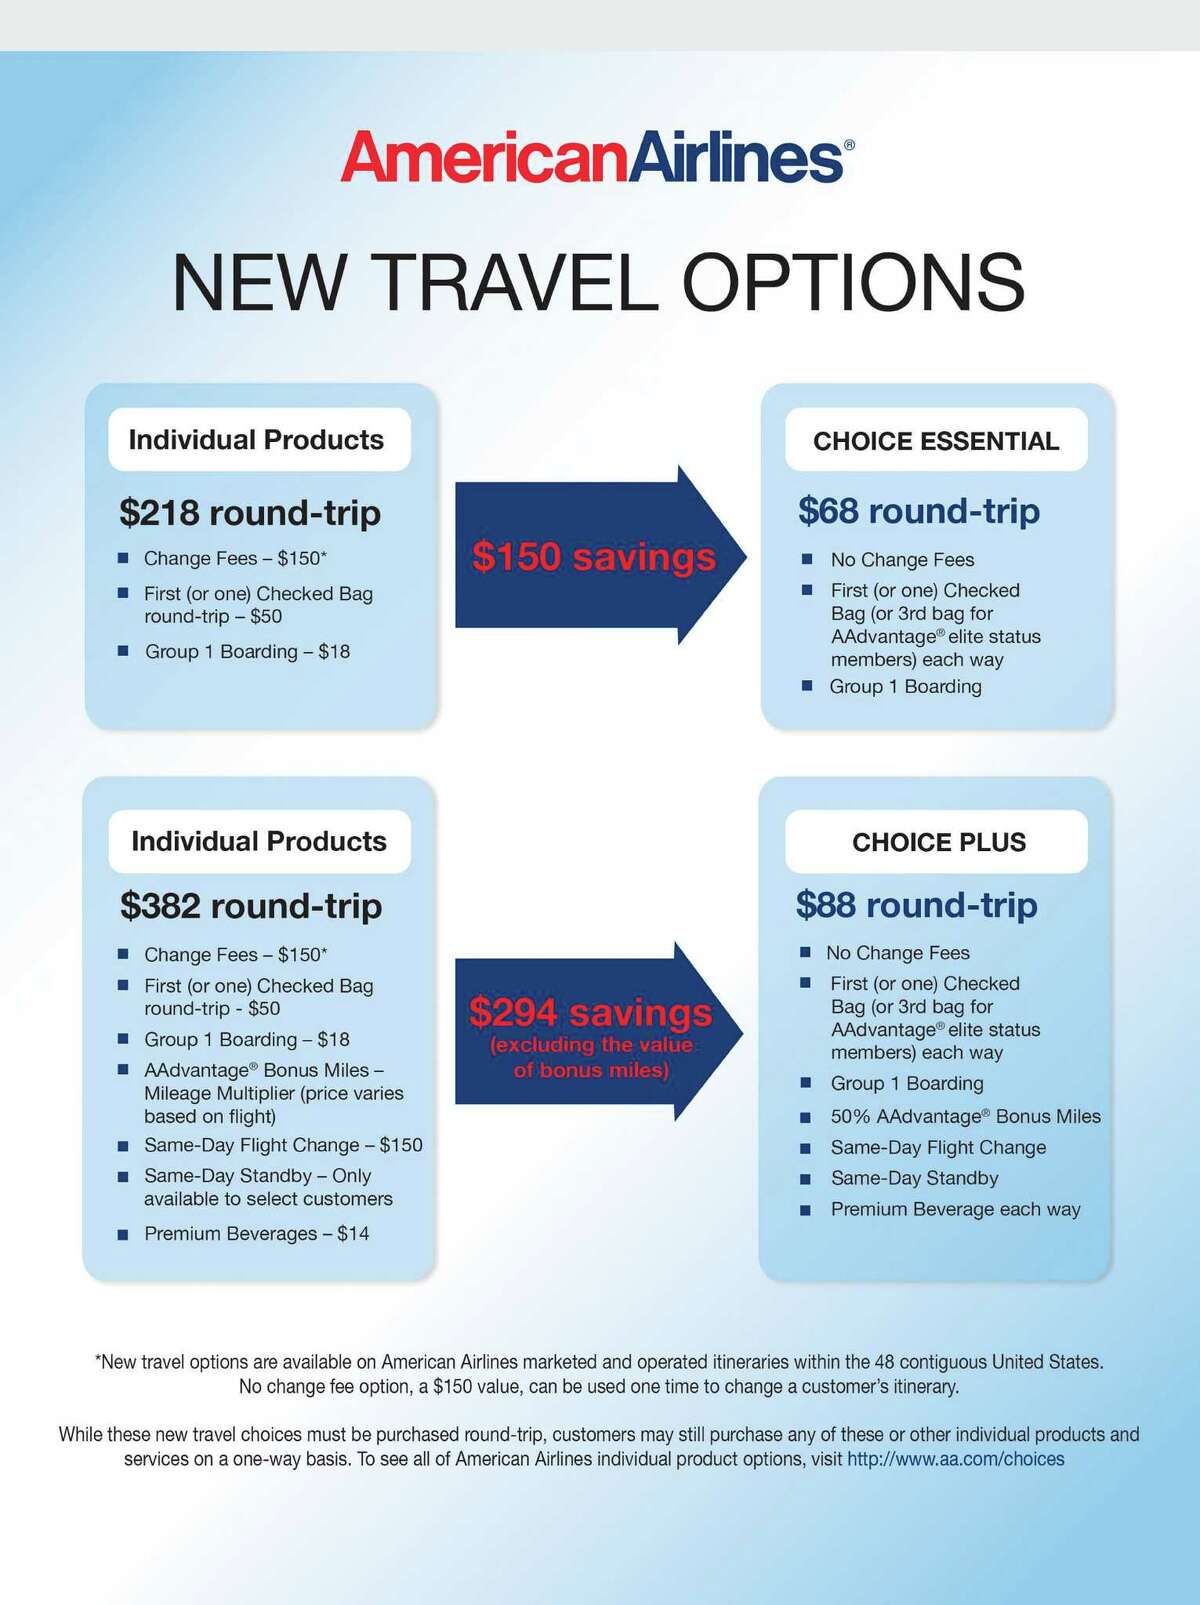 AA launches new booking path with travel options for greater value & convenience. (PRNewsFoto/American Airlines)